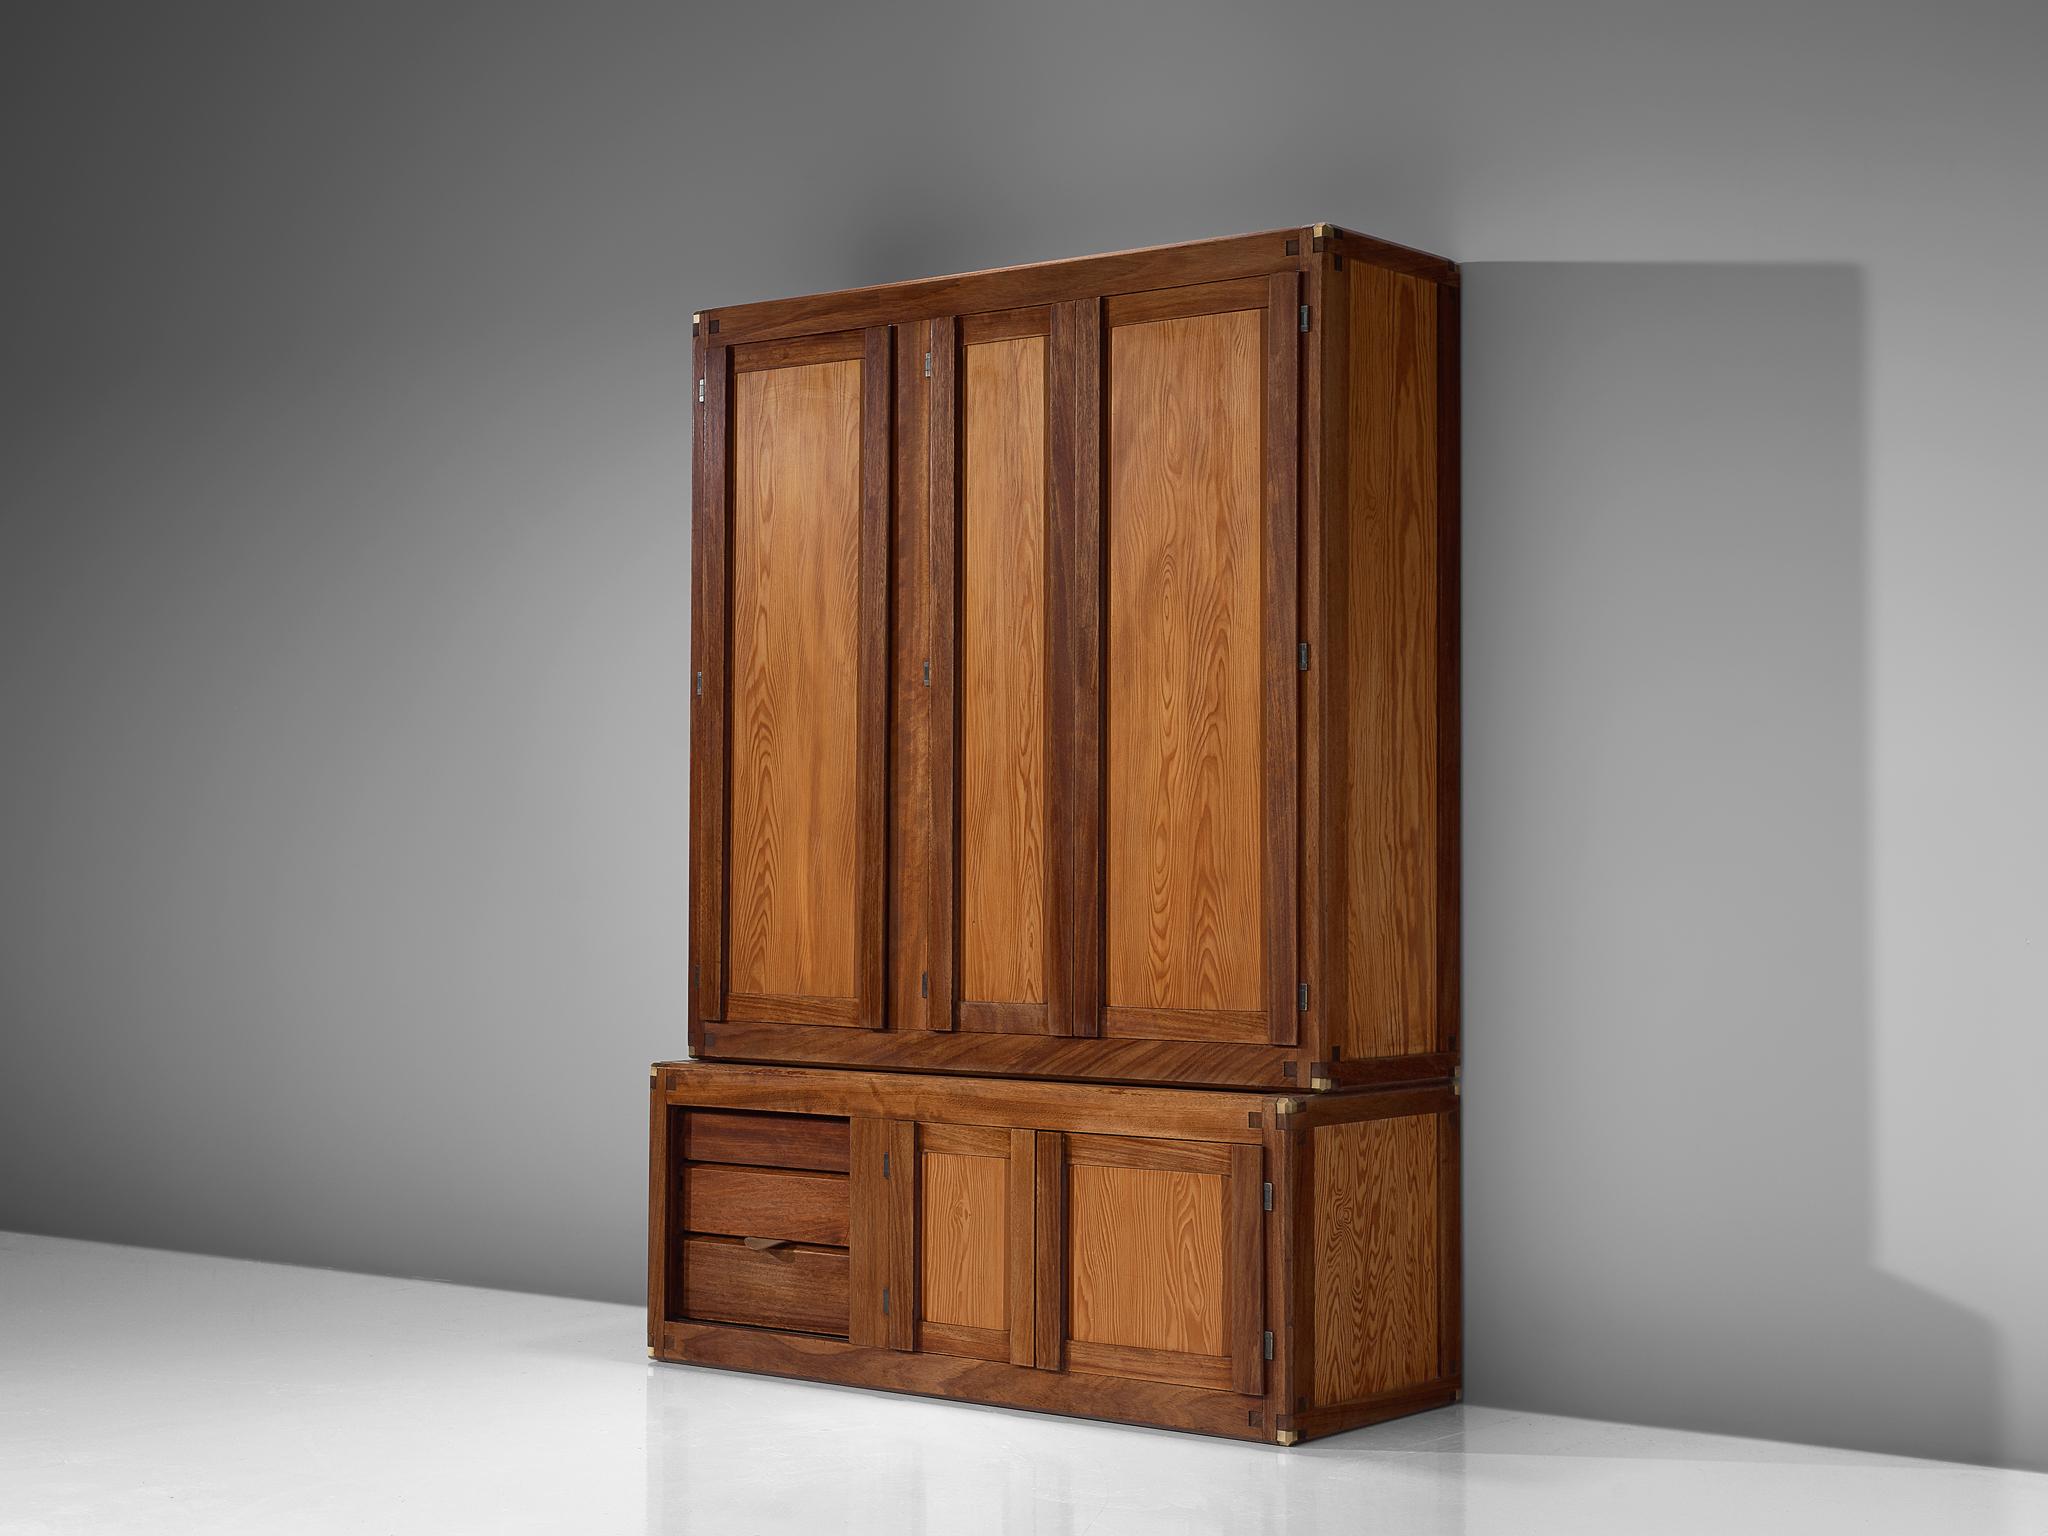 Pierre Chapo, cabinet B10, solid elm, France, 1960s. 

This bookcase or high cabinet is designed by the French designer Pierre Chapo. It is a piece of furniture that is modular and therefore could be designed according to the clients own wishes.